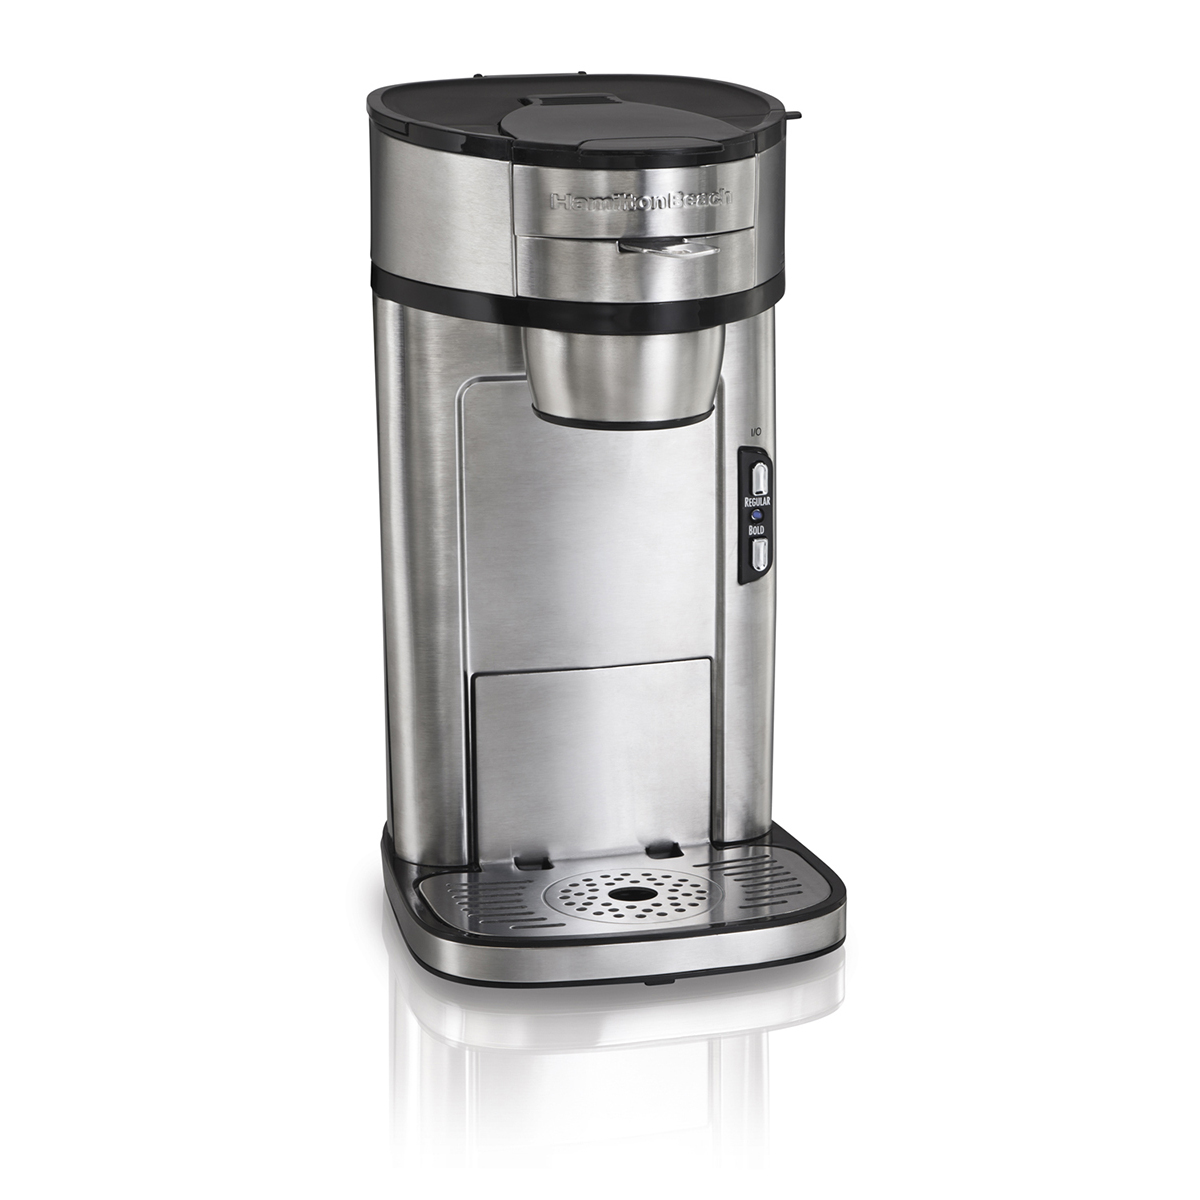 The Scoop® Single-Serve Coffee Maker, Stainless (49981)